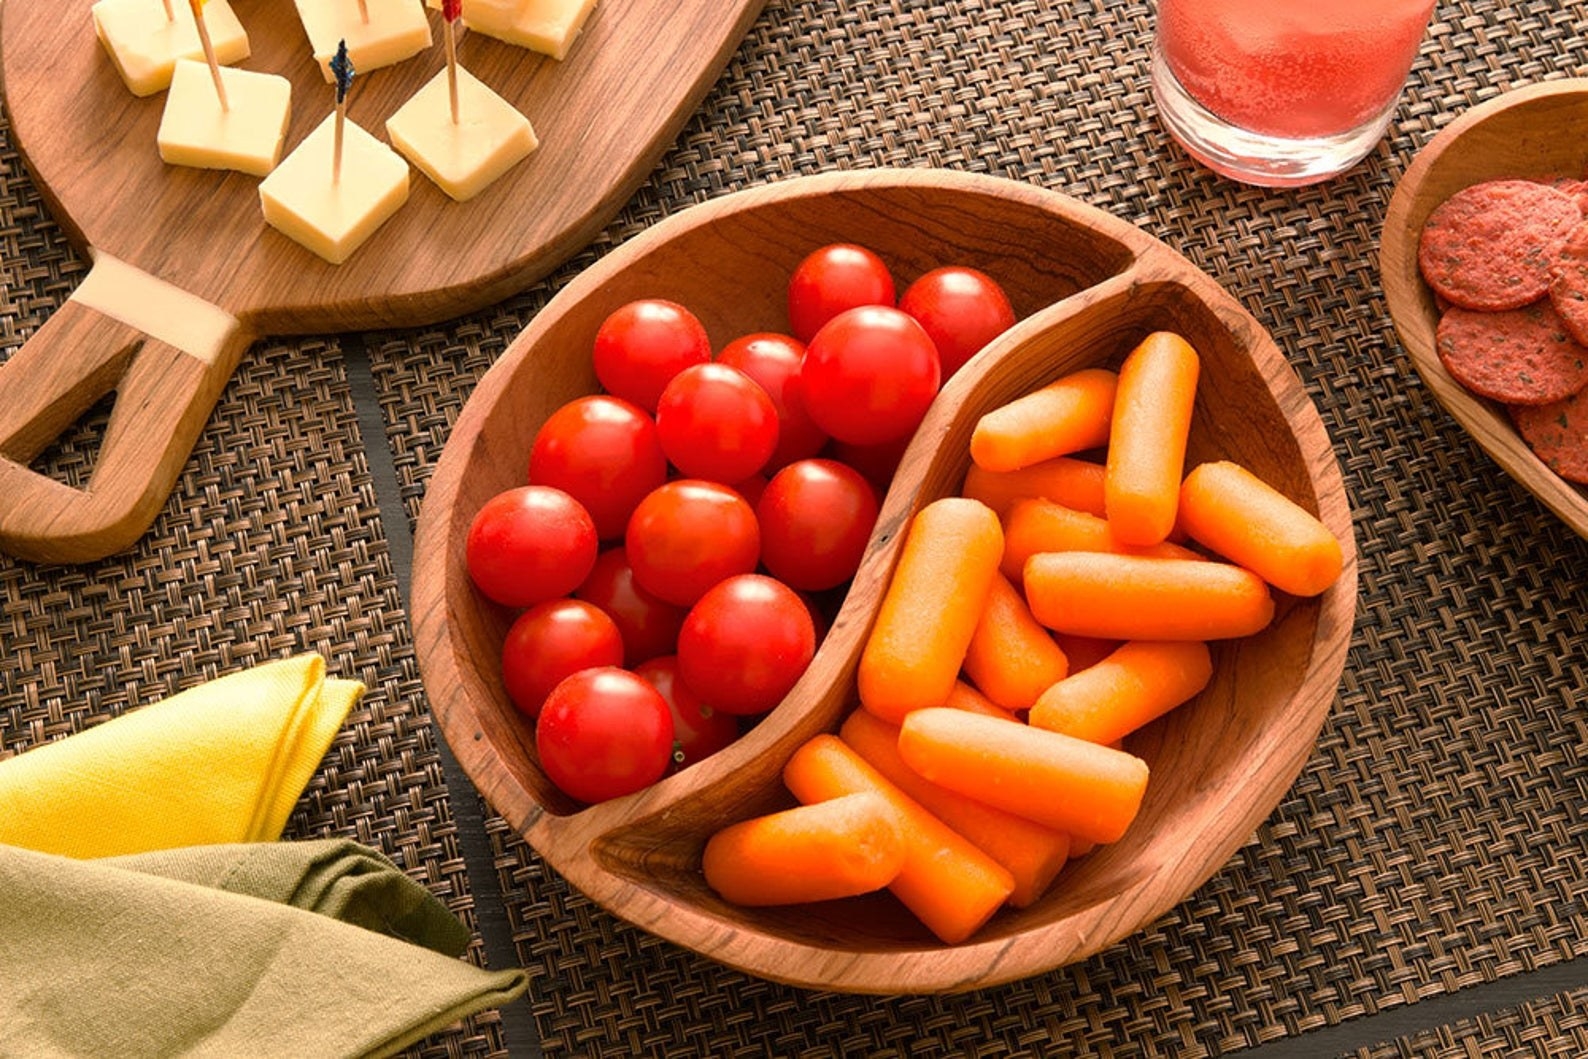 The duet serving bowl with cherry tomatoes on one side and carrots on the other